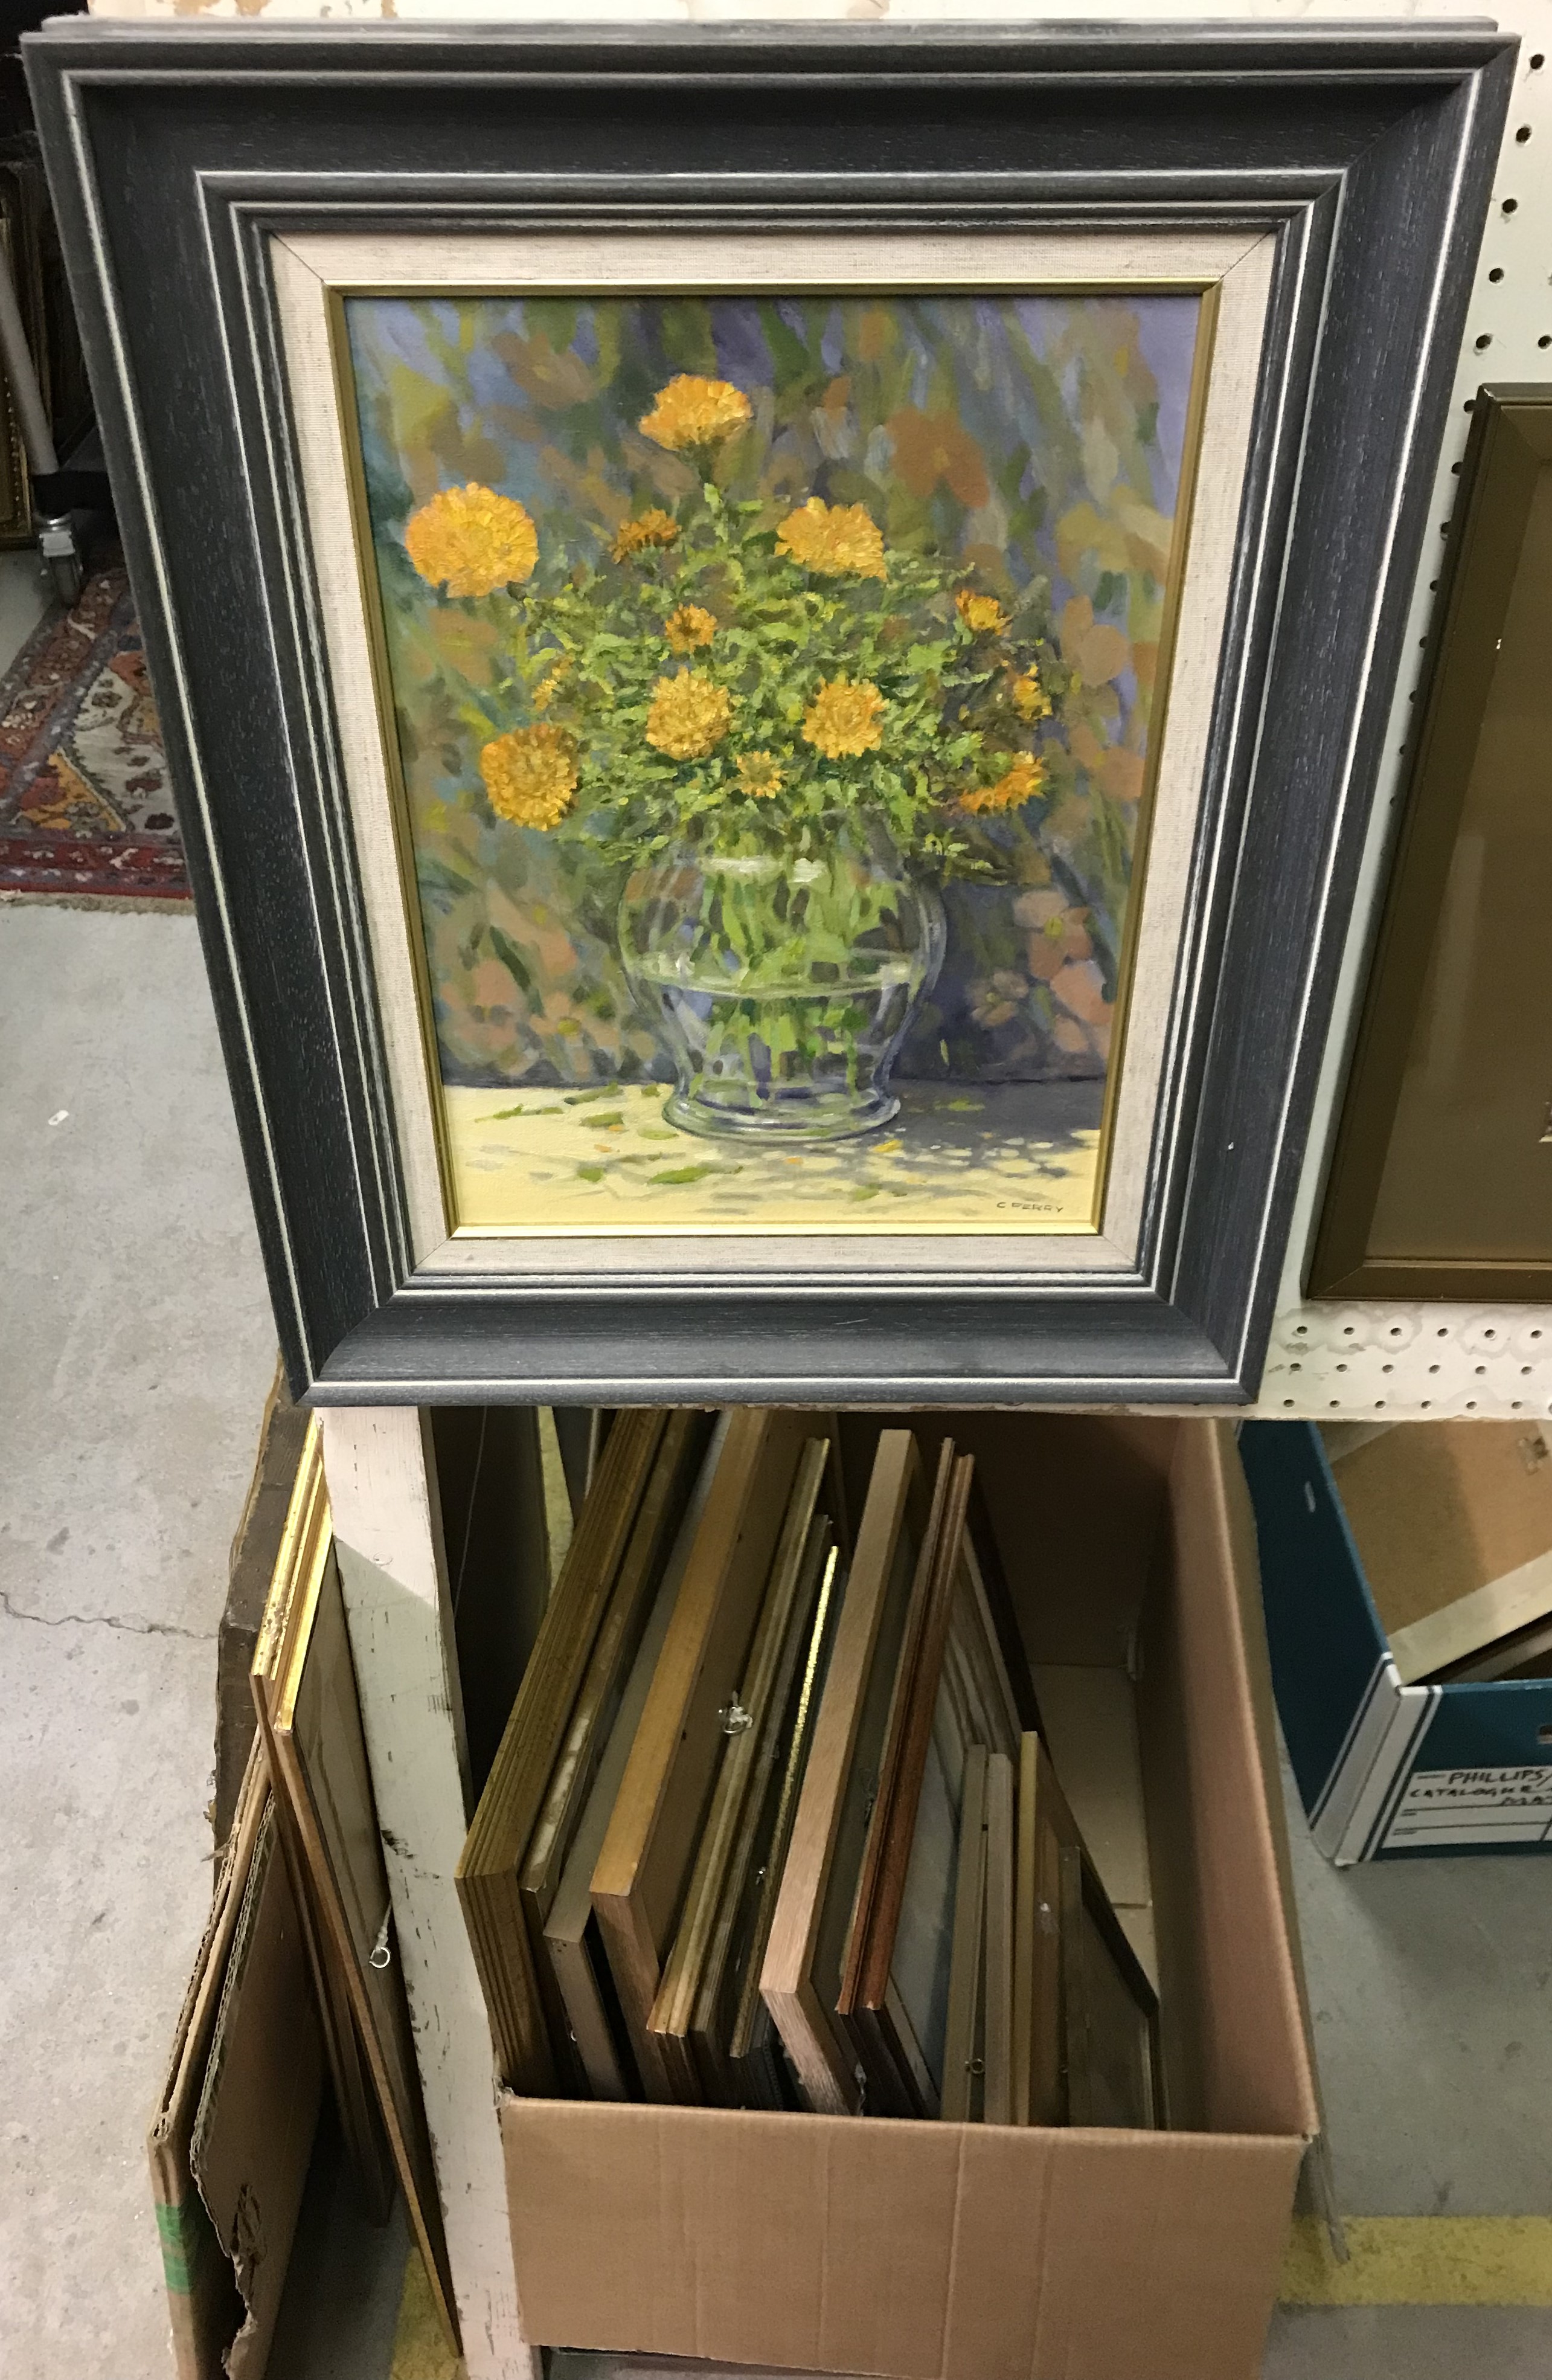 C. PERRY "Marigolds" oil on board, signed lower right, titled and dated '95 label verso, 34.